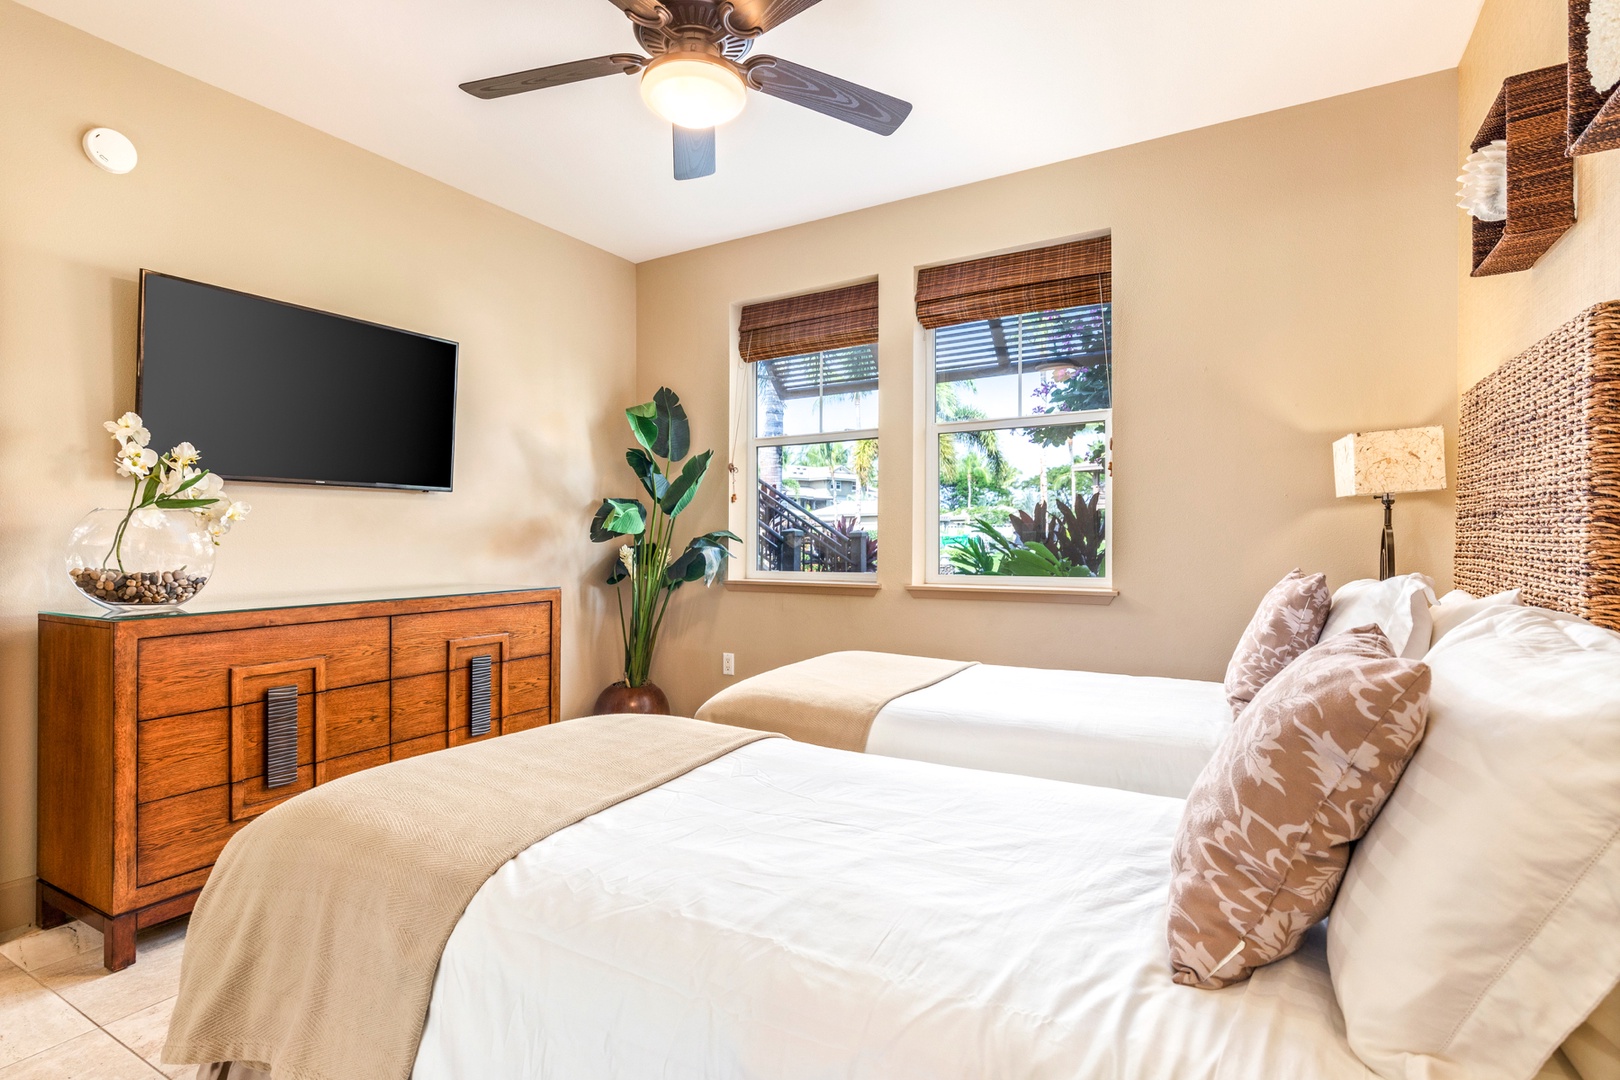 Waikoloa Vacation Rentals, 2BD Hali'i Kai 12C at Waikoloa Resort - Guest bedroom with two twin beds (can convert to a king upon request), wall mounted smart flat screen TV and an adjacent full bath.